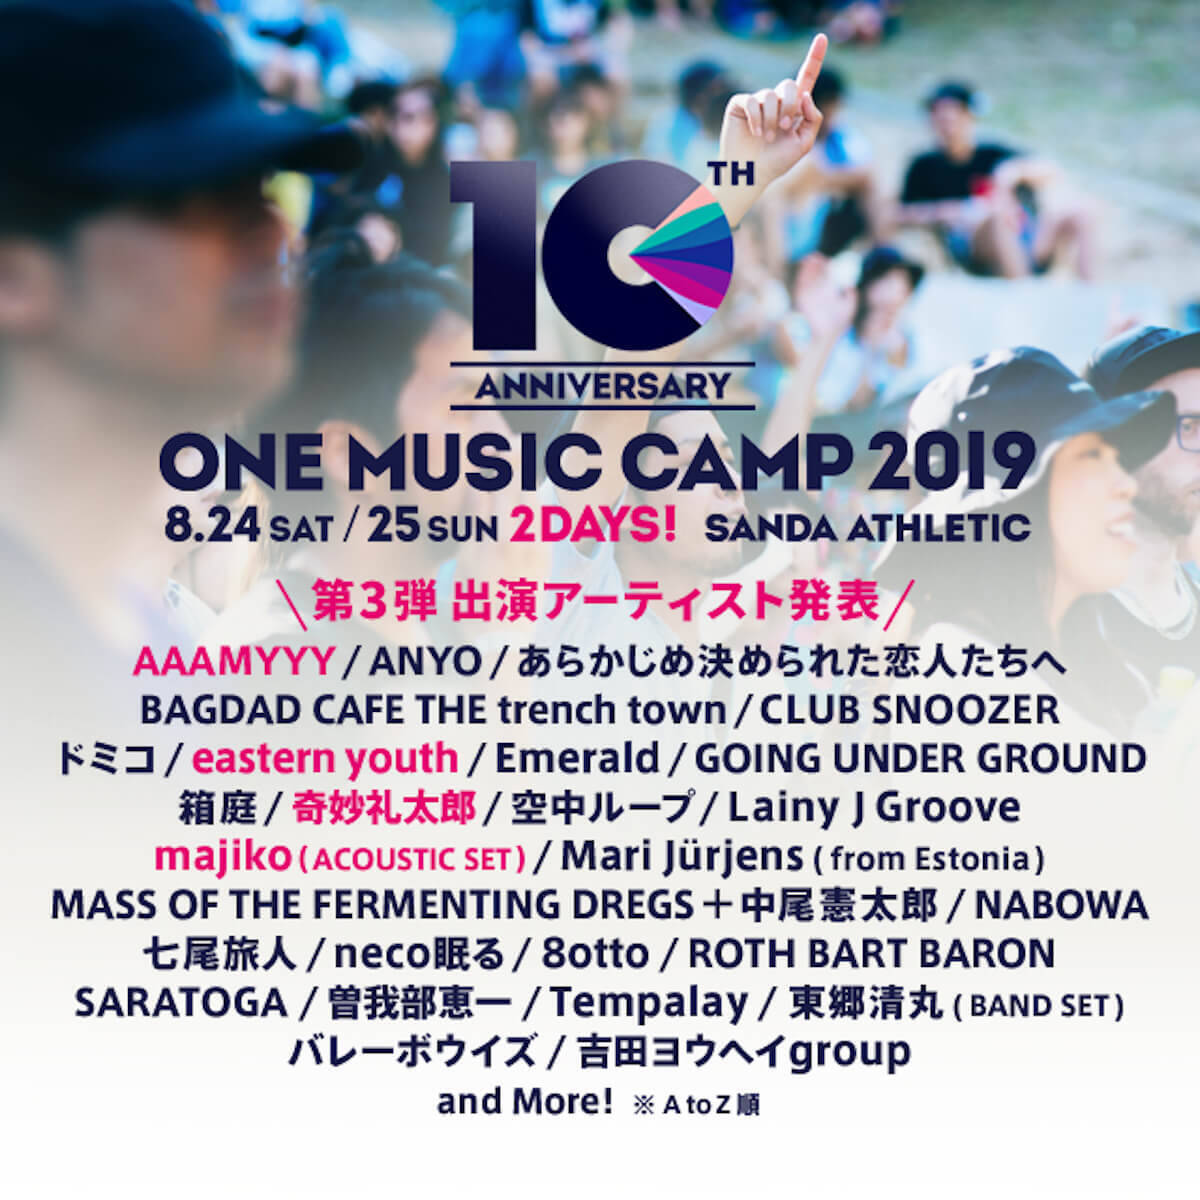 ＜ONE MUSIC CAMP 2019＞第3弾アーティスト発表｜AAAMYYY、eastern youthら4組の出演が決定！